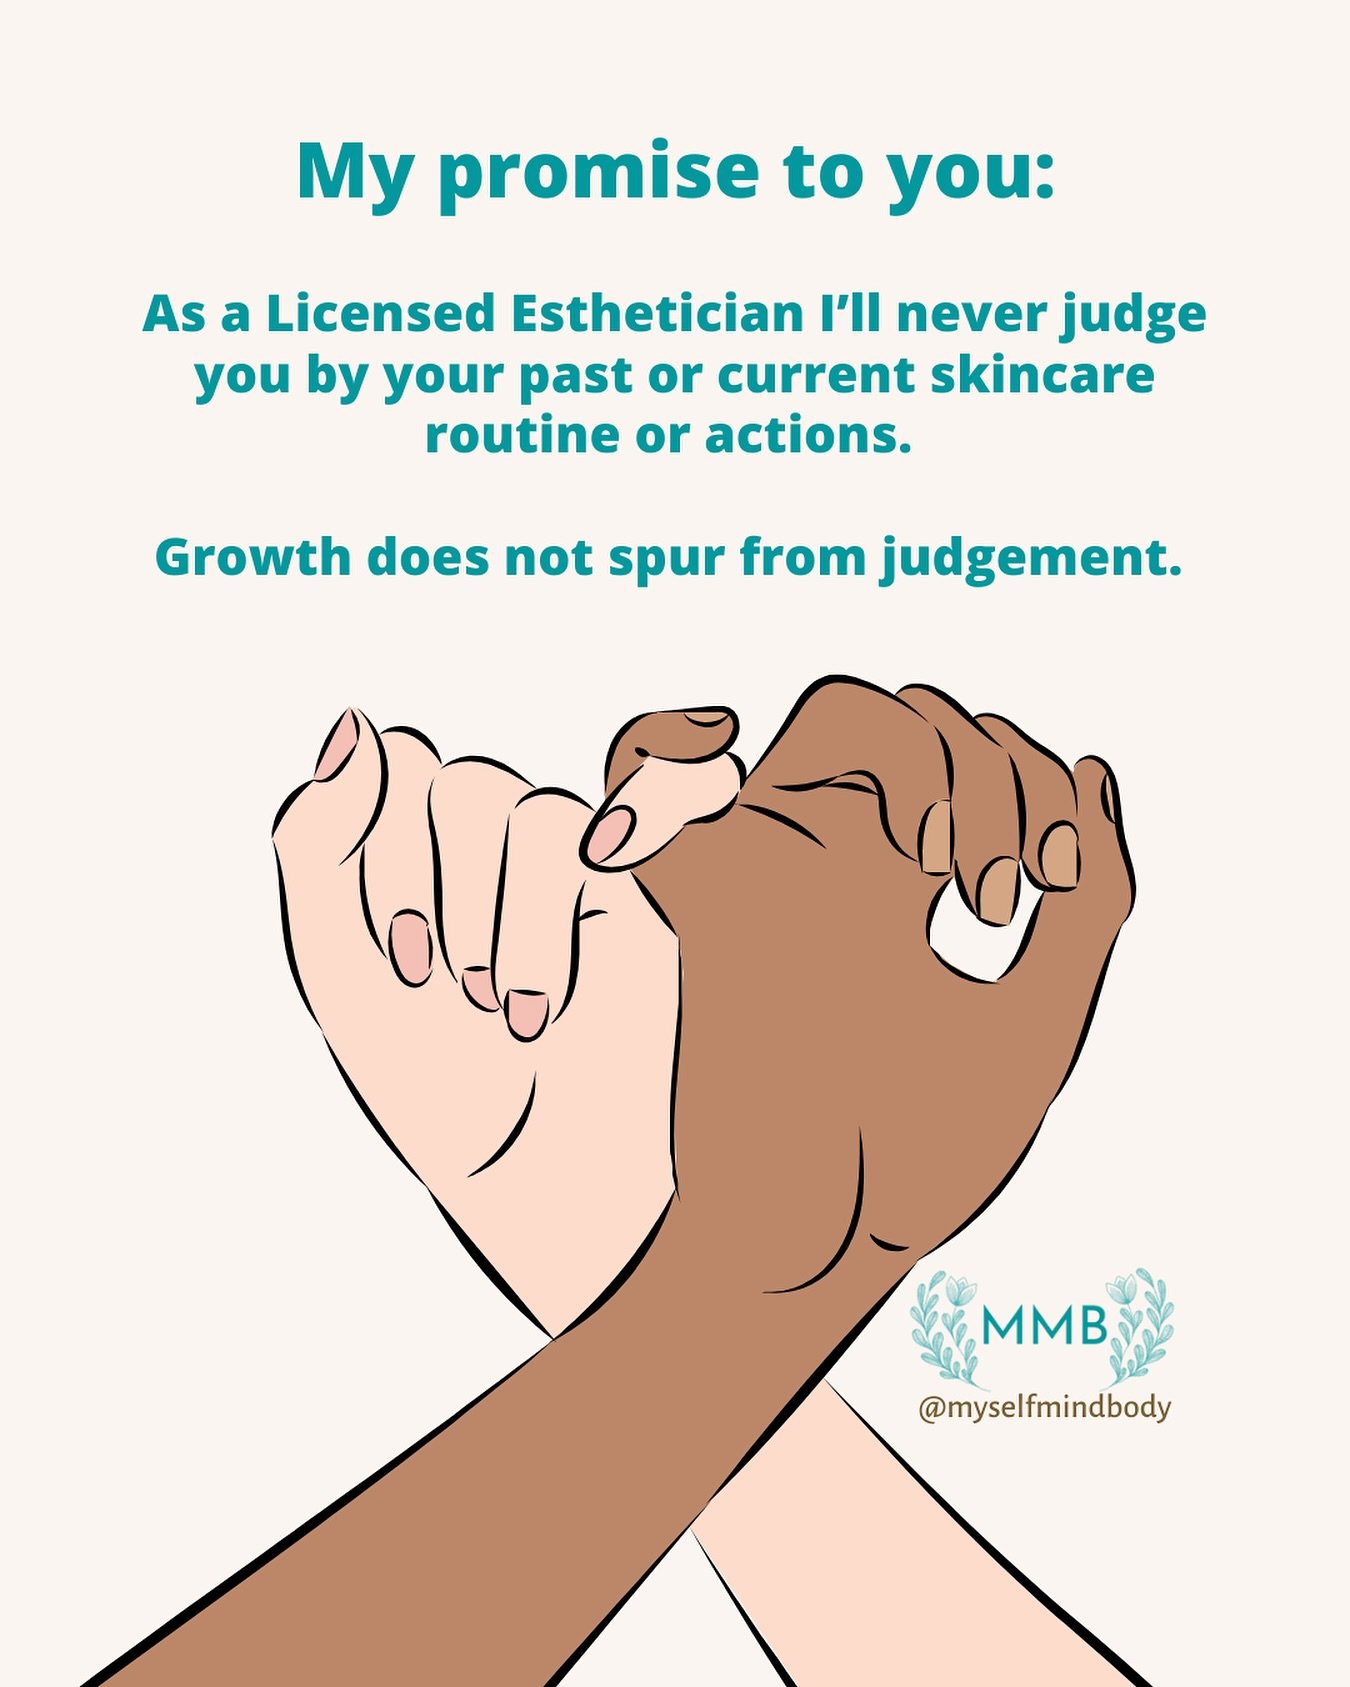 My promise to you: As your Licensed Esthetician, I&rsquo;m here to support, not judge. 

Your skin&rsquo;s past or present doesn&rsquo;t define our journey together. Growth and glowing skin arise from understanding and gentle guidance, not judgment. 